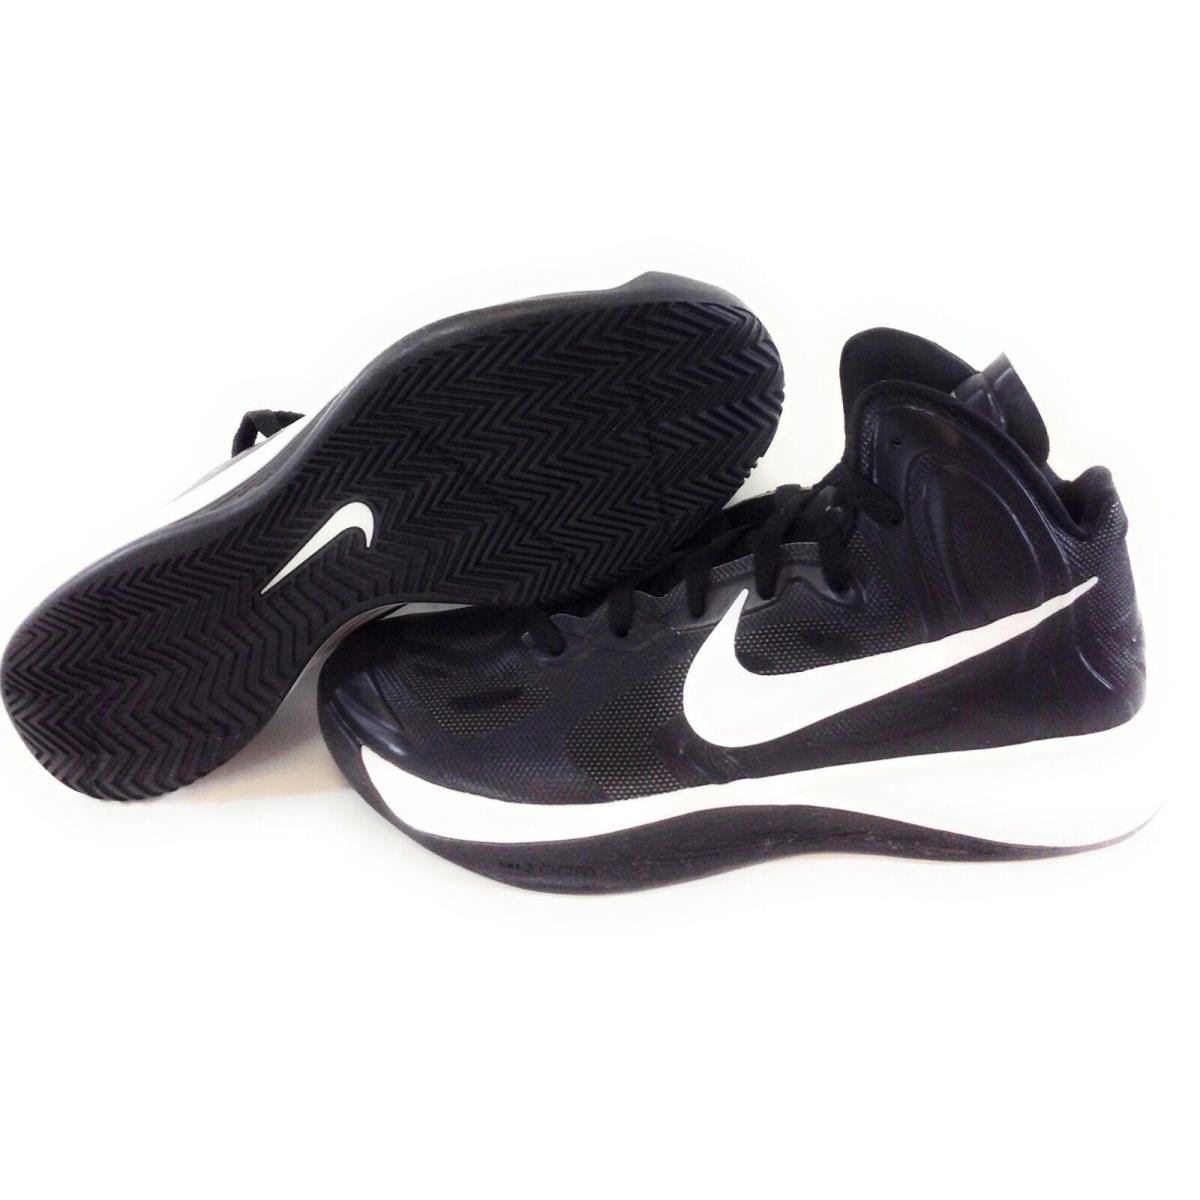 Womens Nike Hyperfuse TB 525021 001 Black Basketball 2012 DS Sneakers Shoes - Black